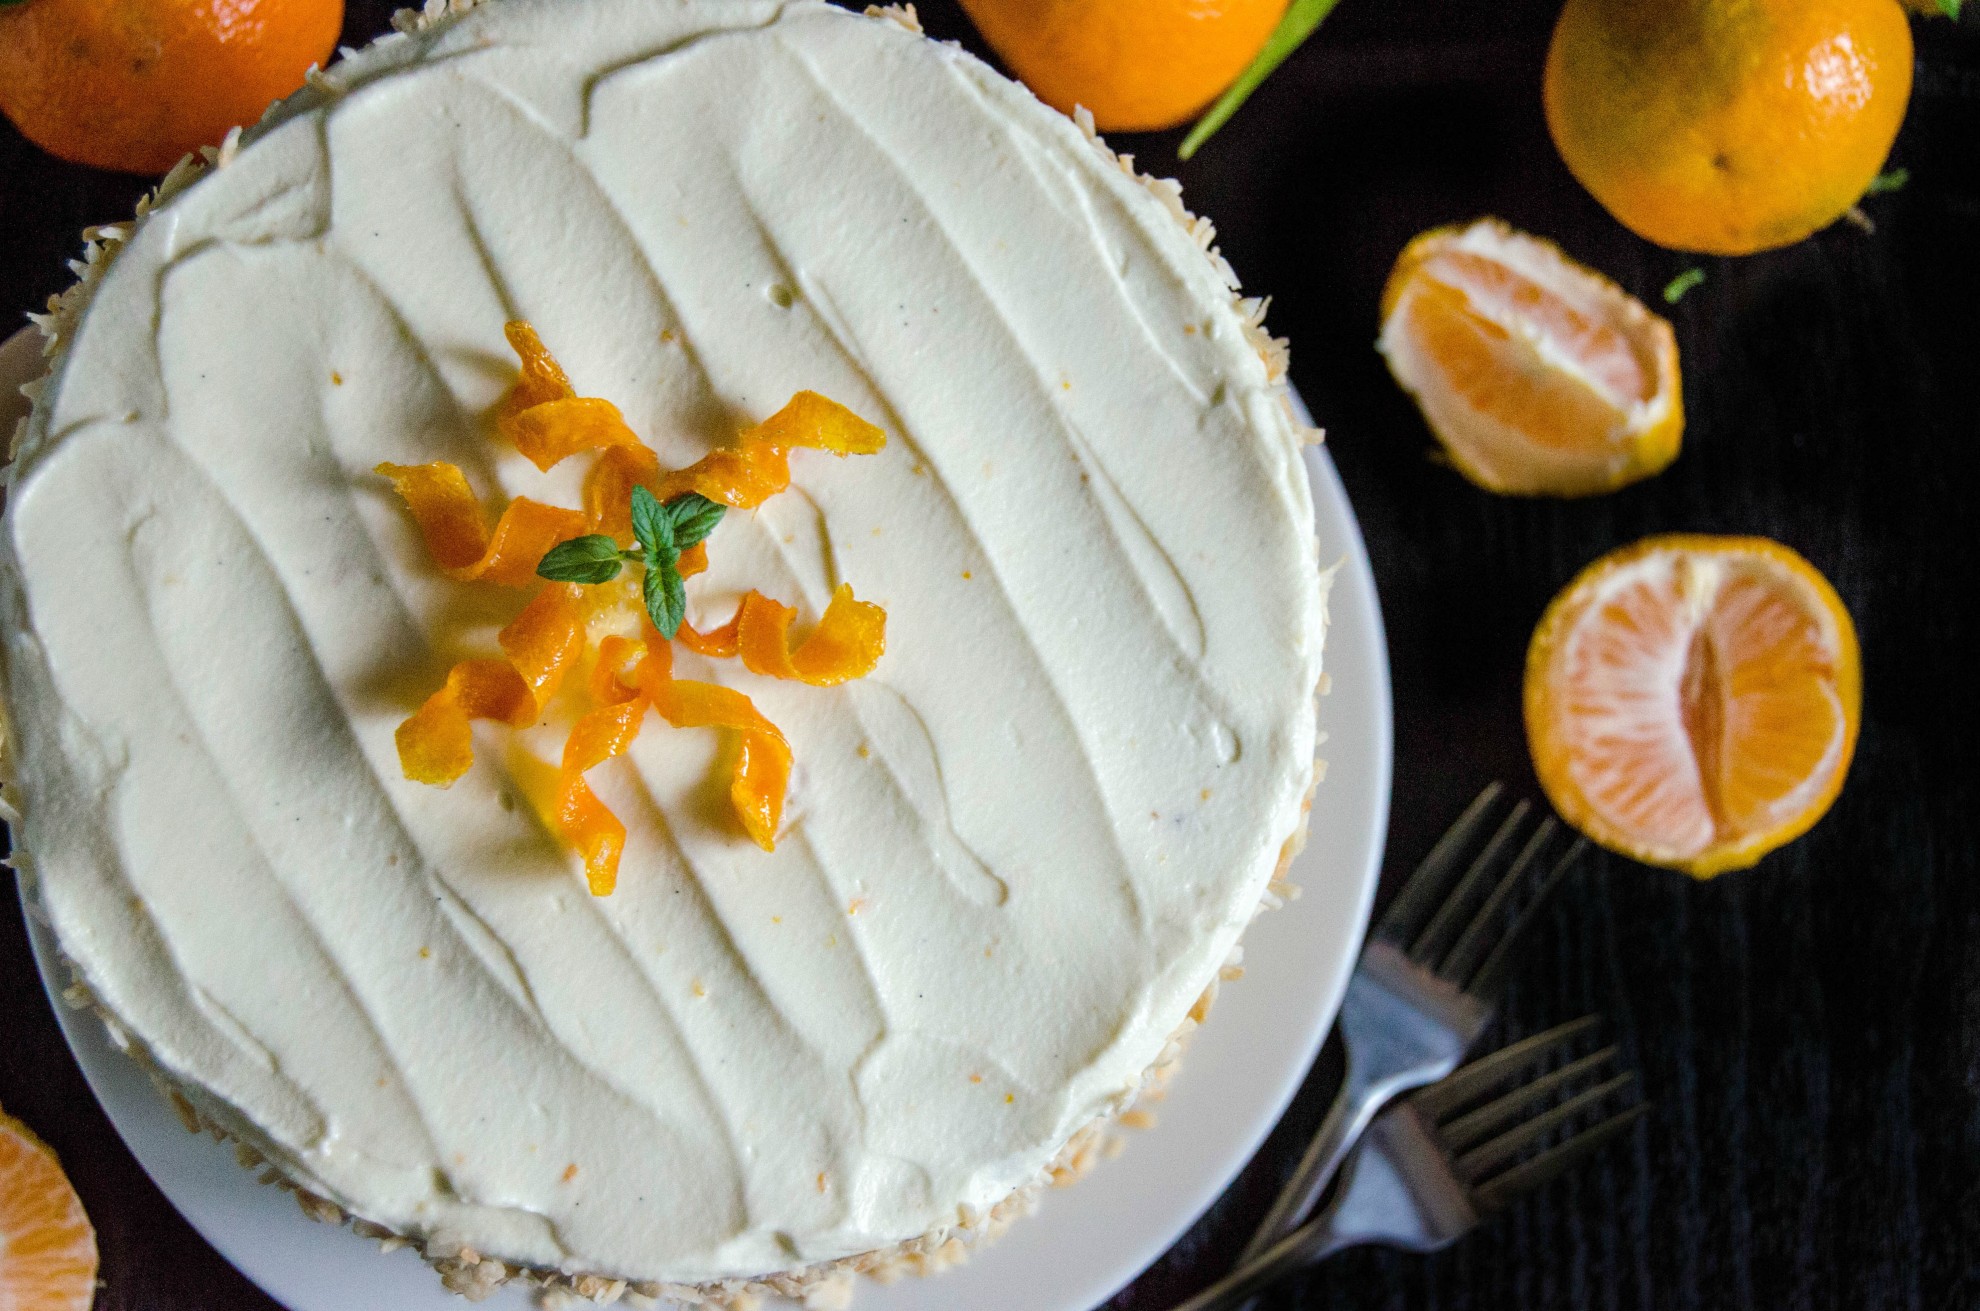 The Ultimate Carrot Cake